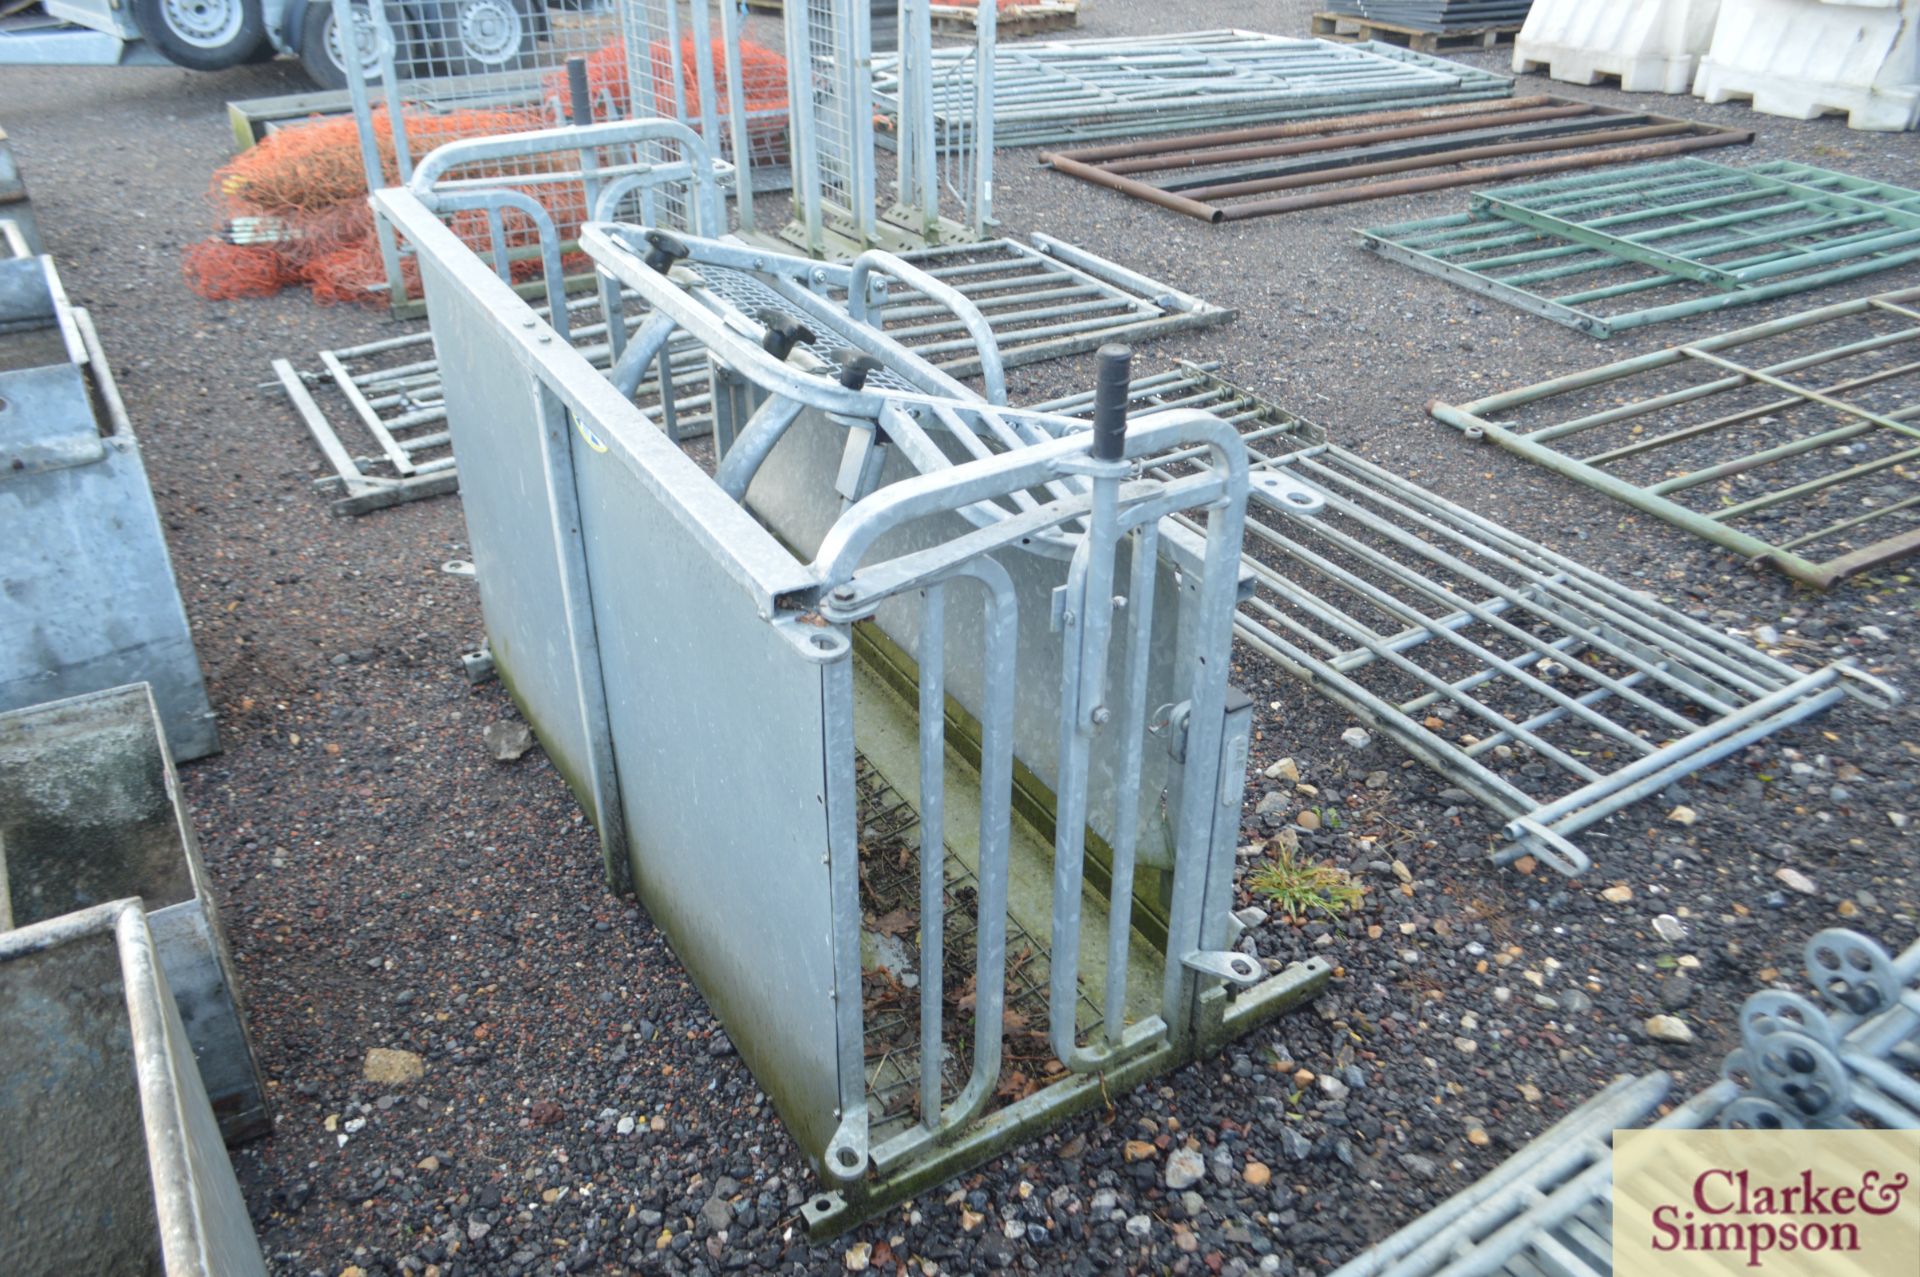 IAE sheep roll over crate. - Image 3 of 4